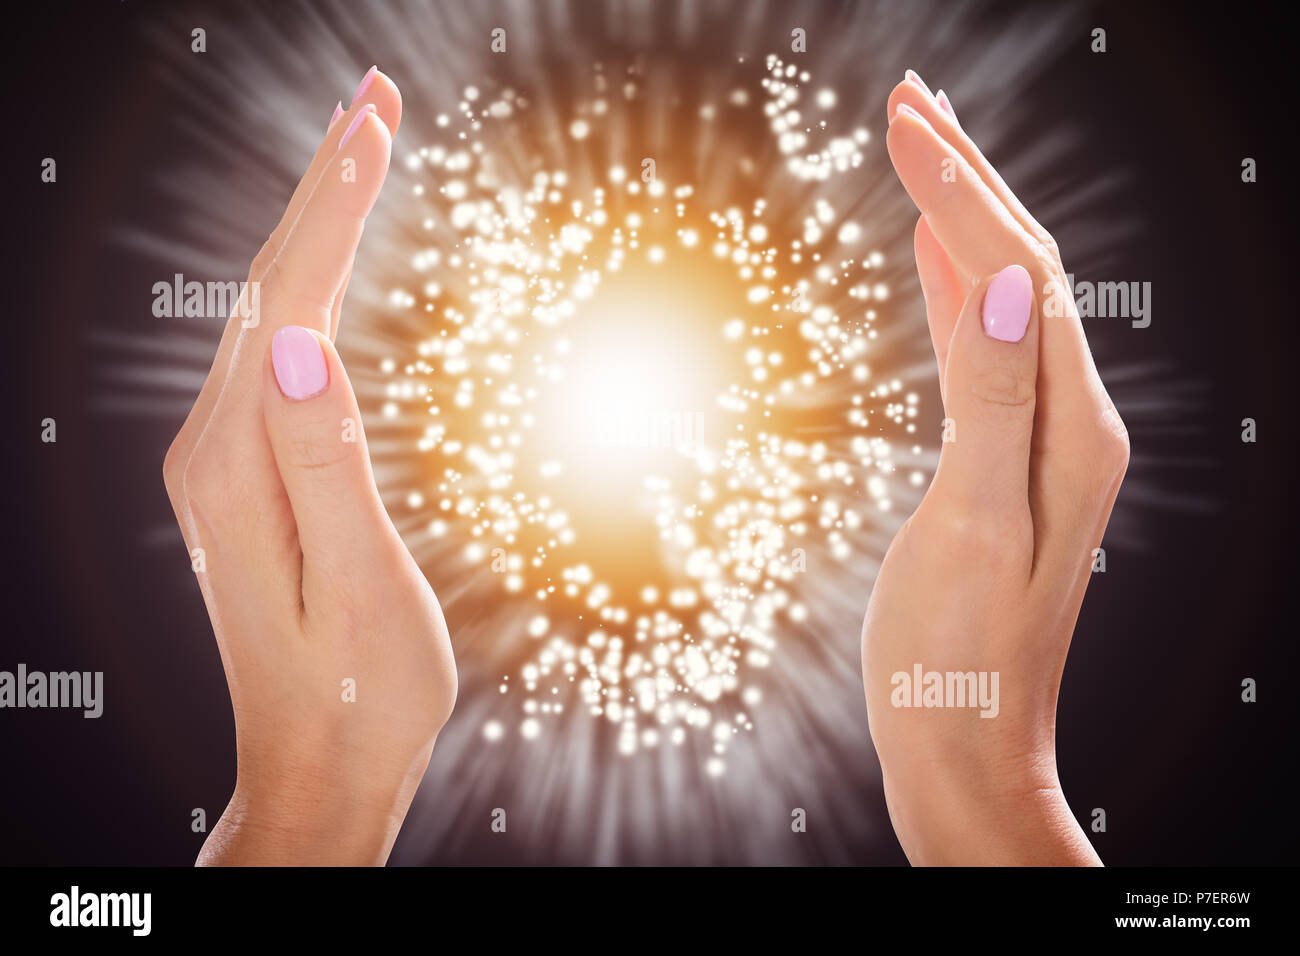 Close-up of a Woman's Hand Holding Light Against Colorful Background Banque D'Images